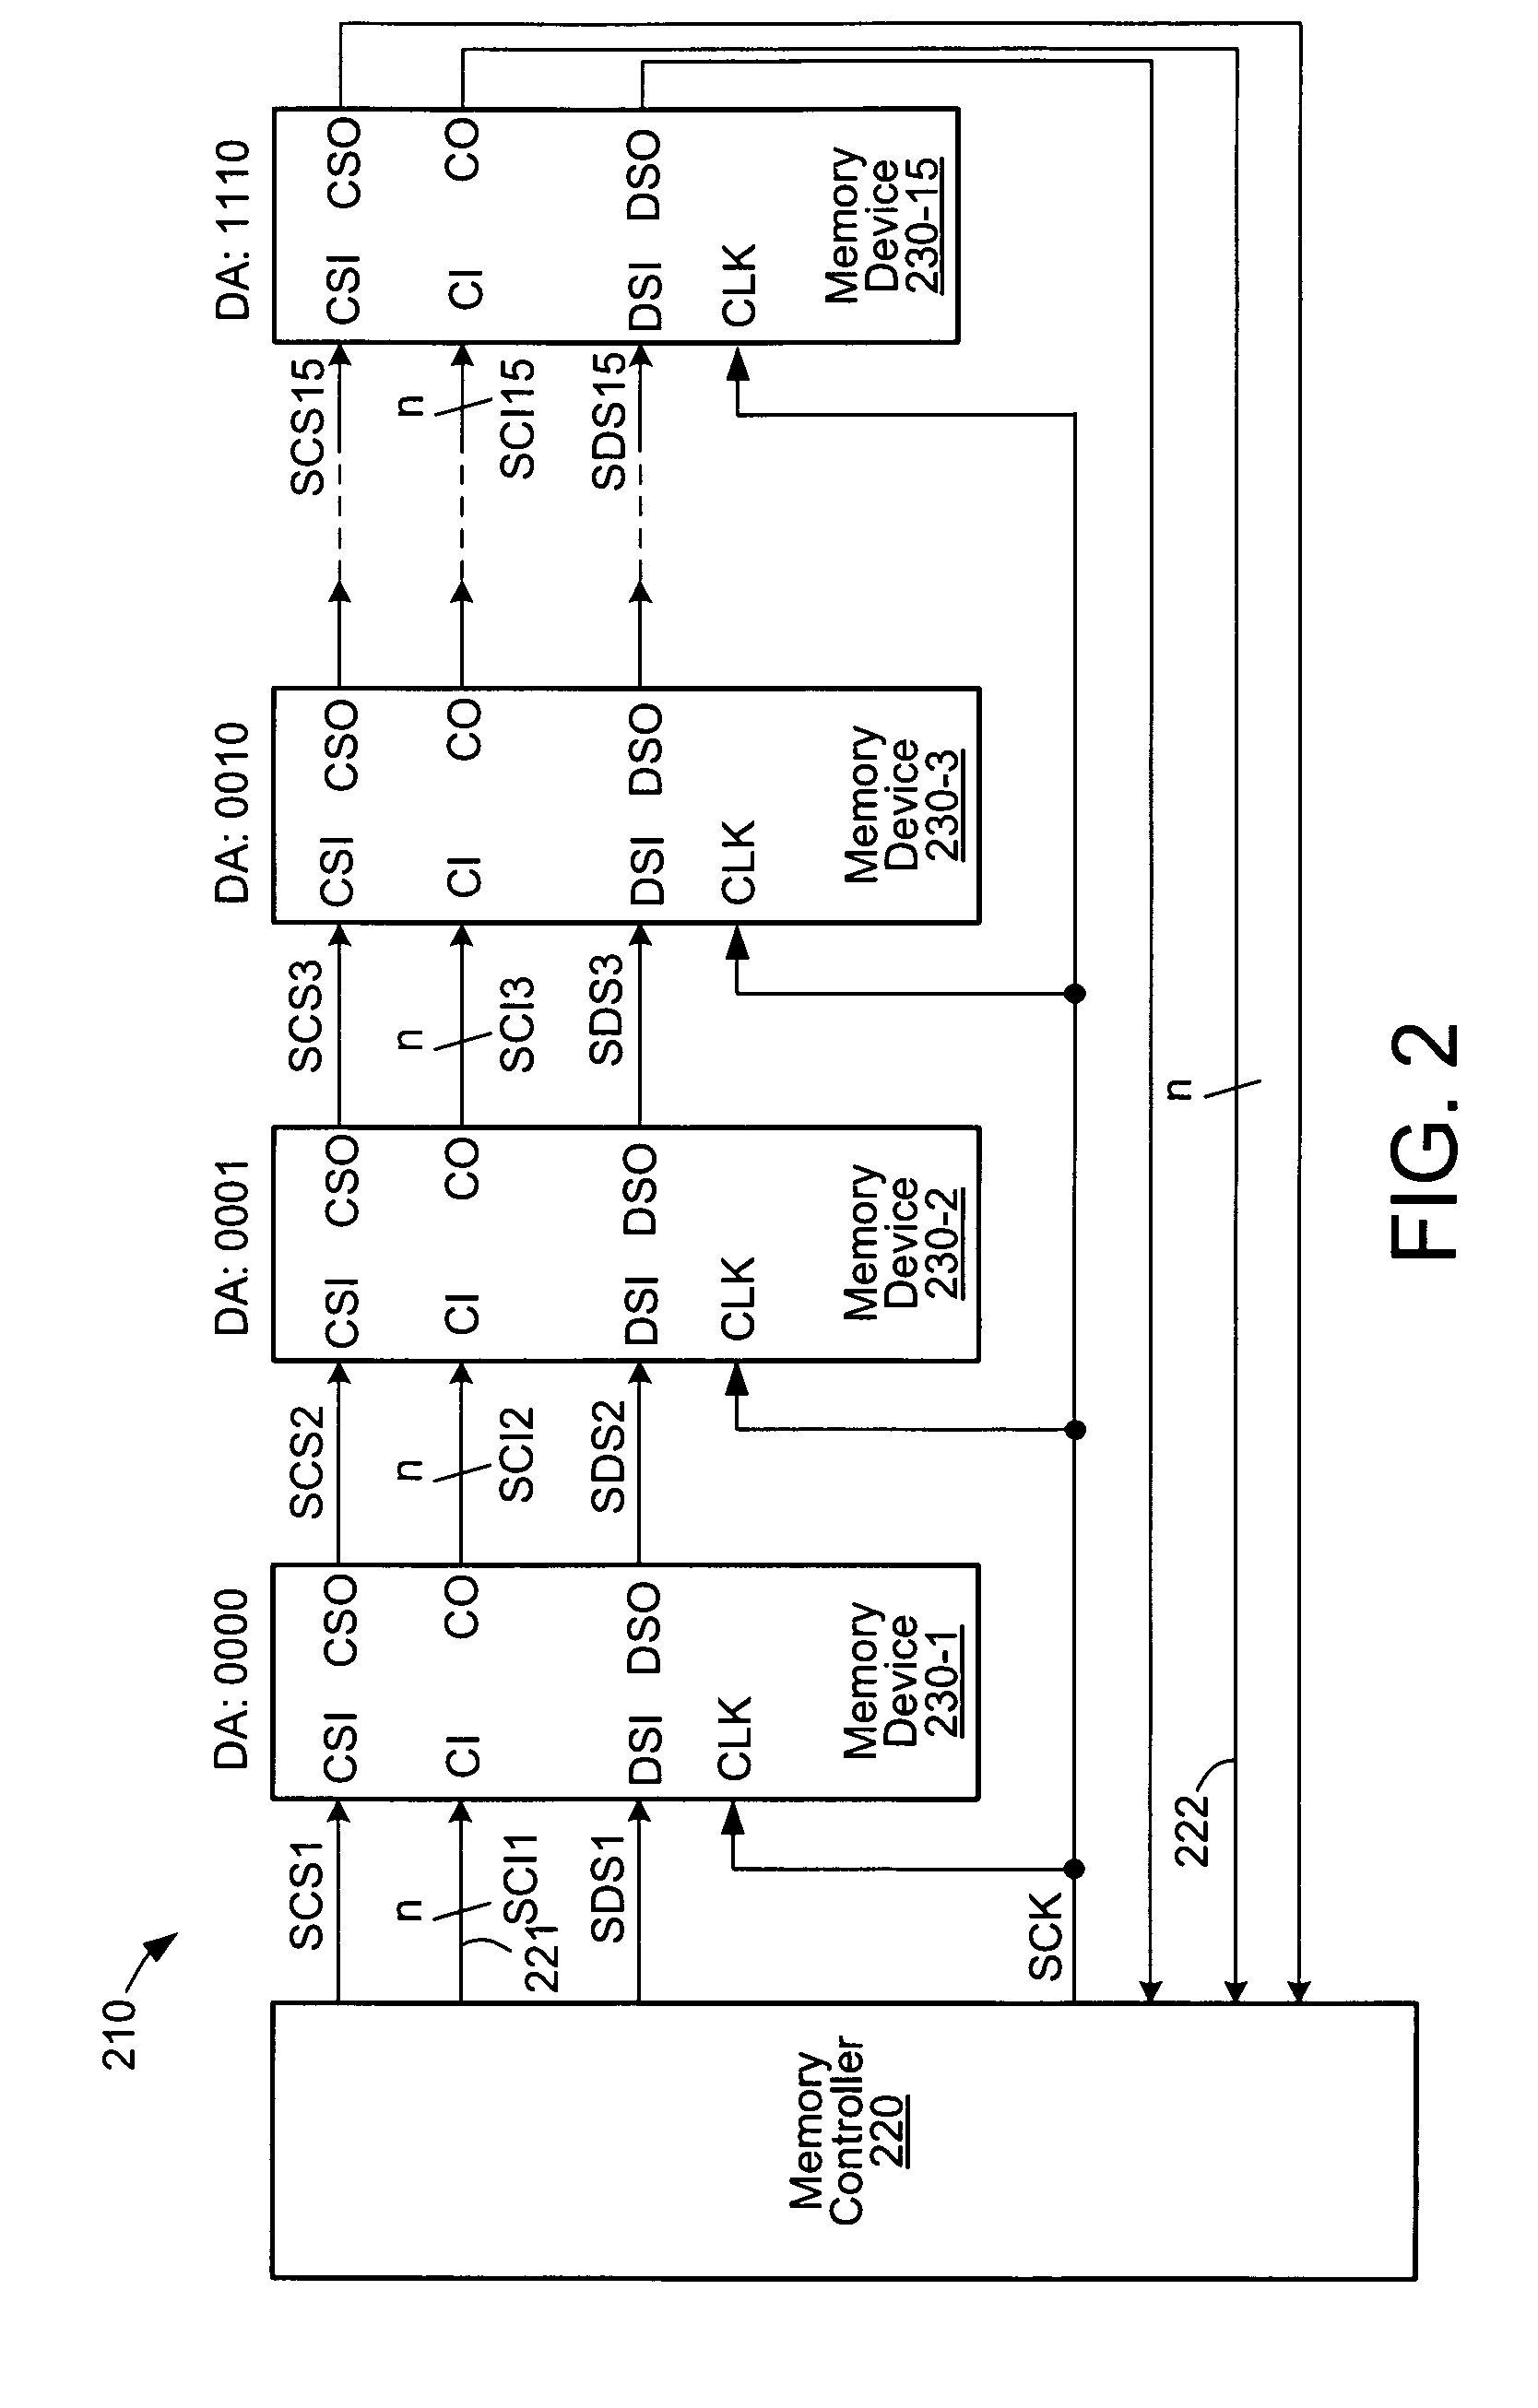 Semiconductor device and method for reducing power consumption in a system having interconnected devices